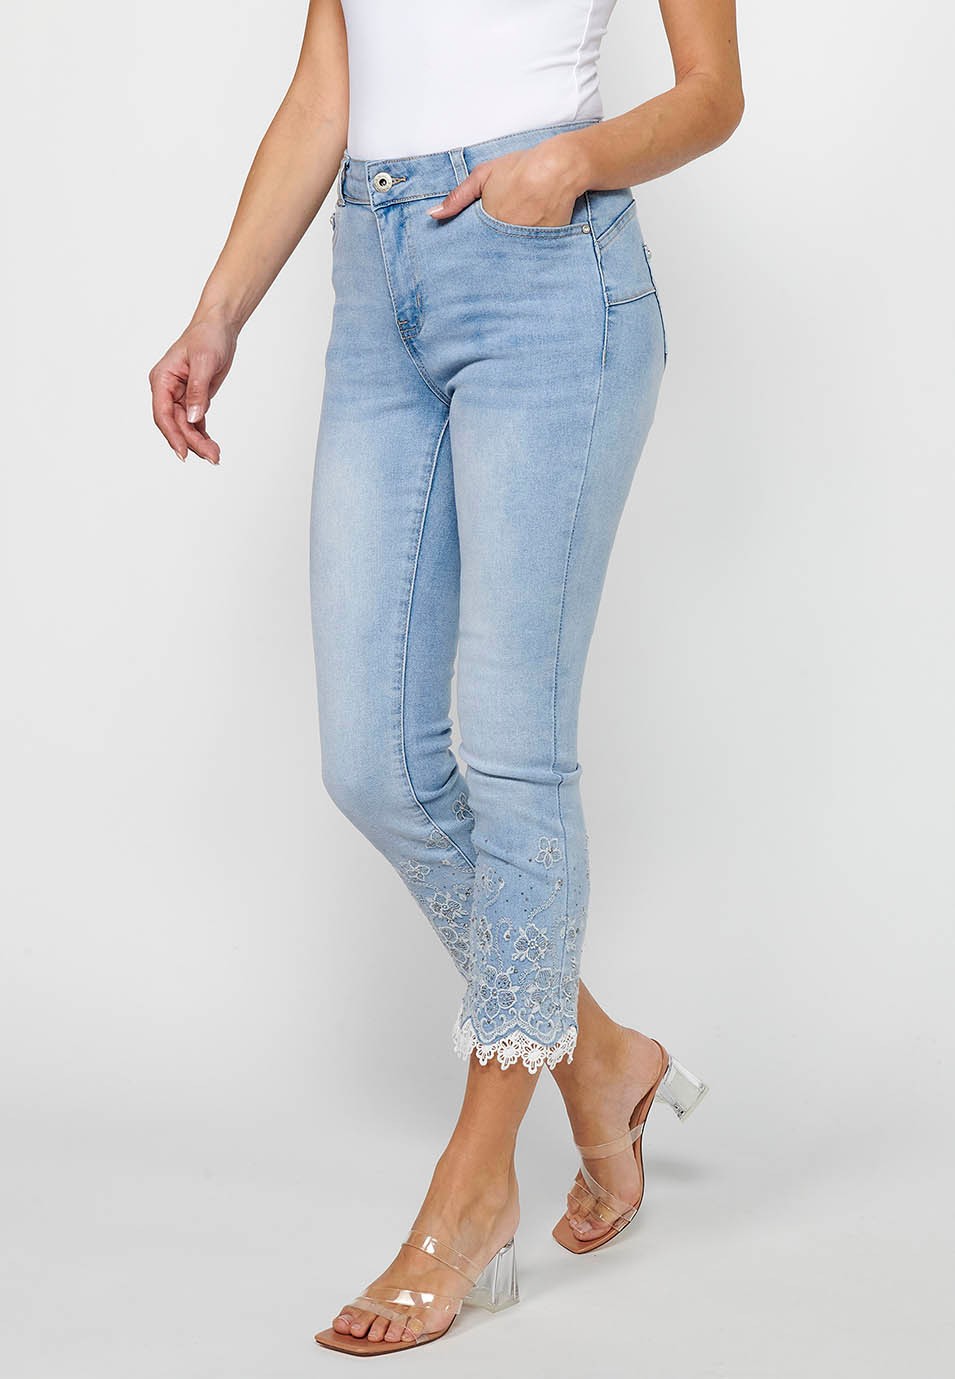 Long slim jeans pants with front zipper closure and light blue floral embroidered details for women 4